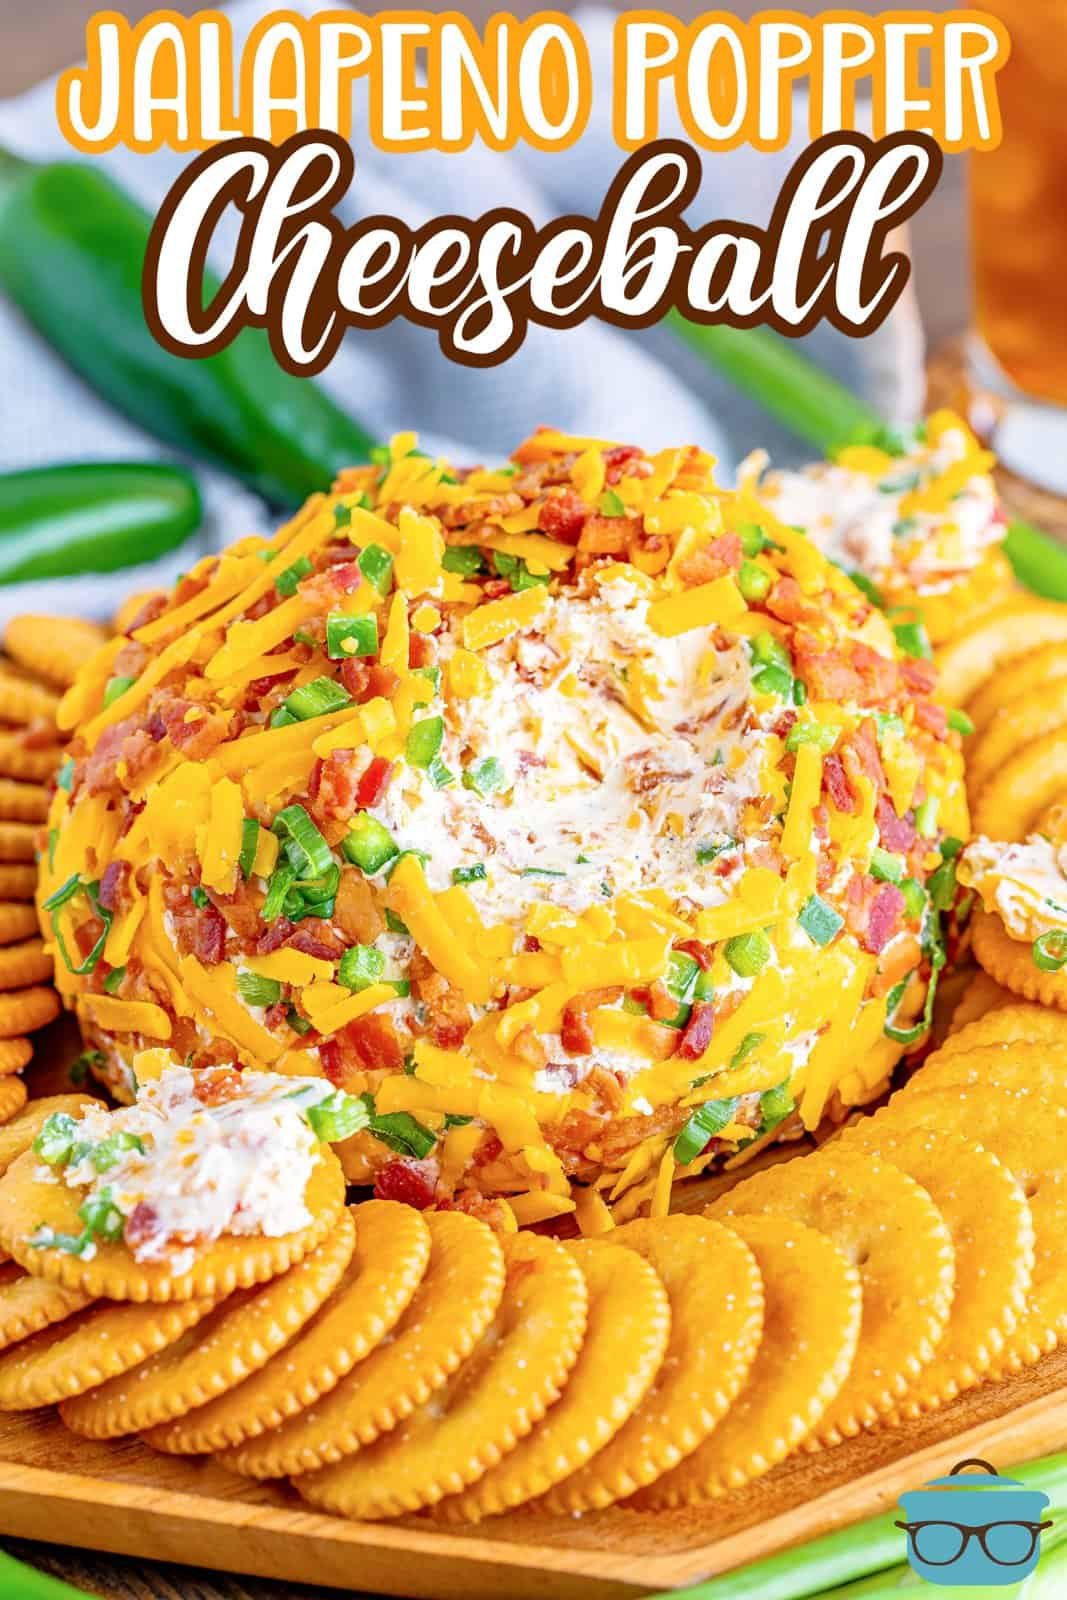 Crackers surrounding a cheeseball with jalapeno flavor, bacon, and chives.